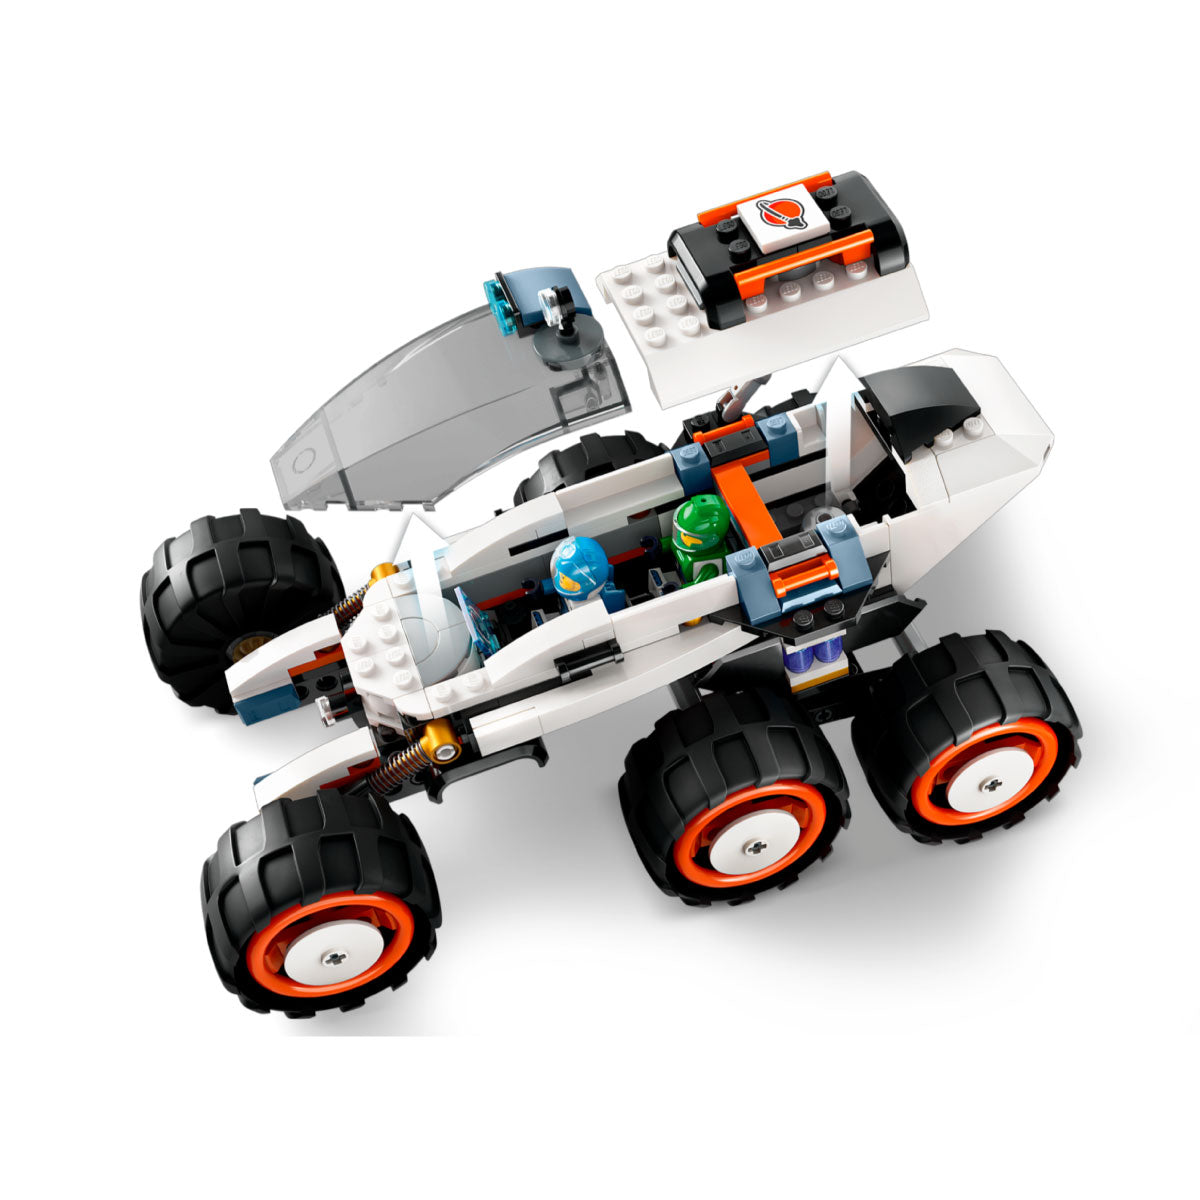 LEGO City Space Explorer Rover and Alien Life